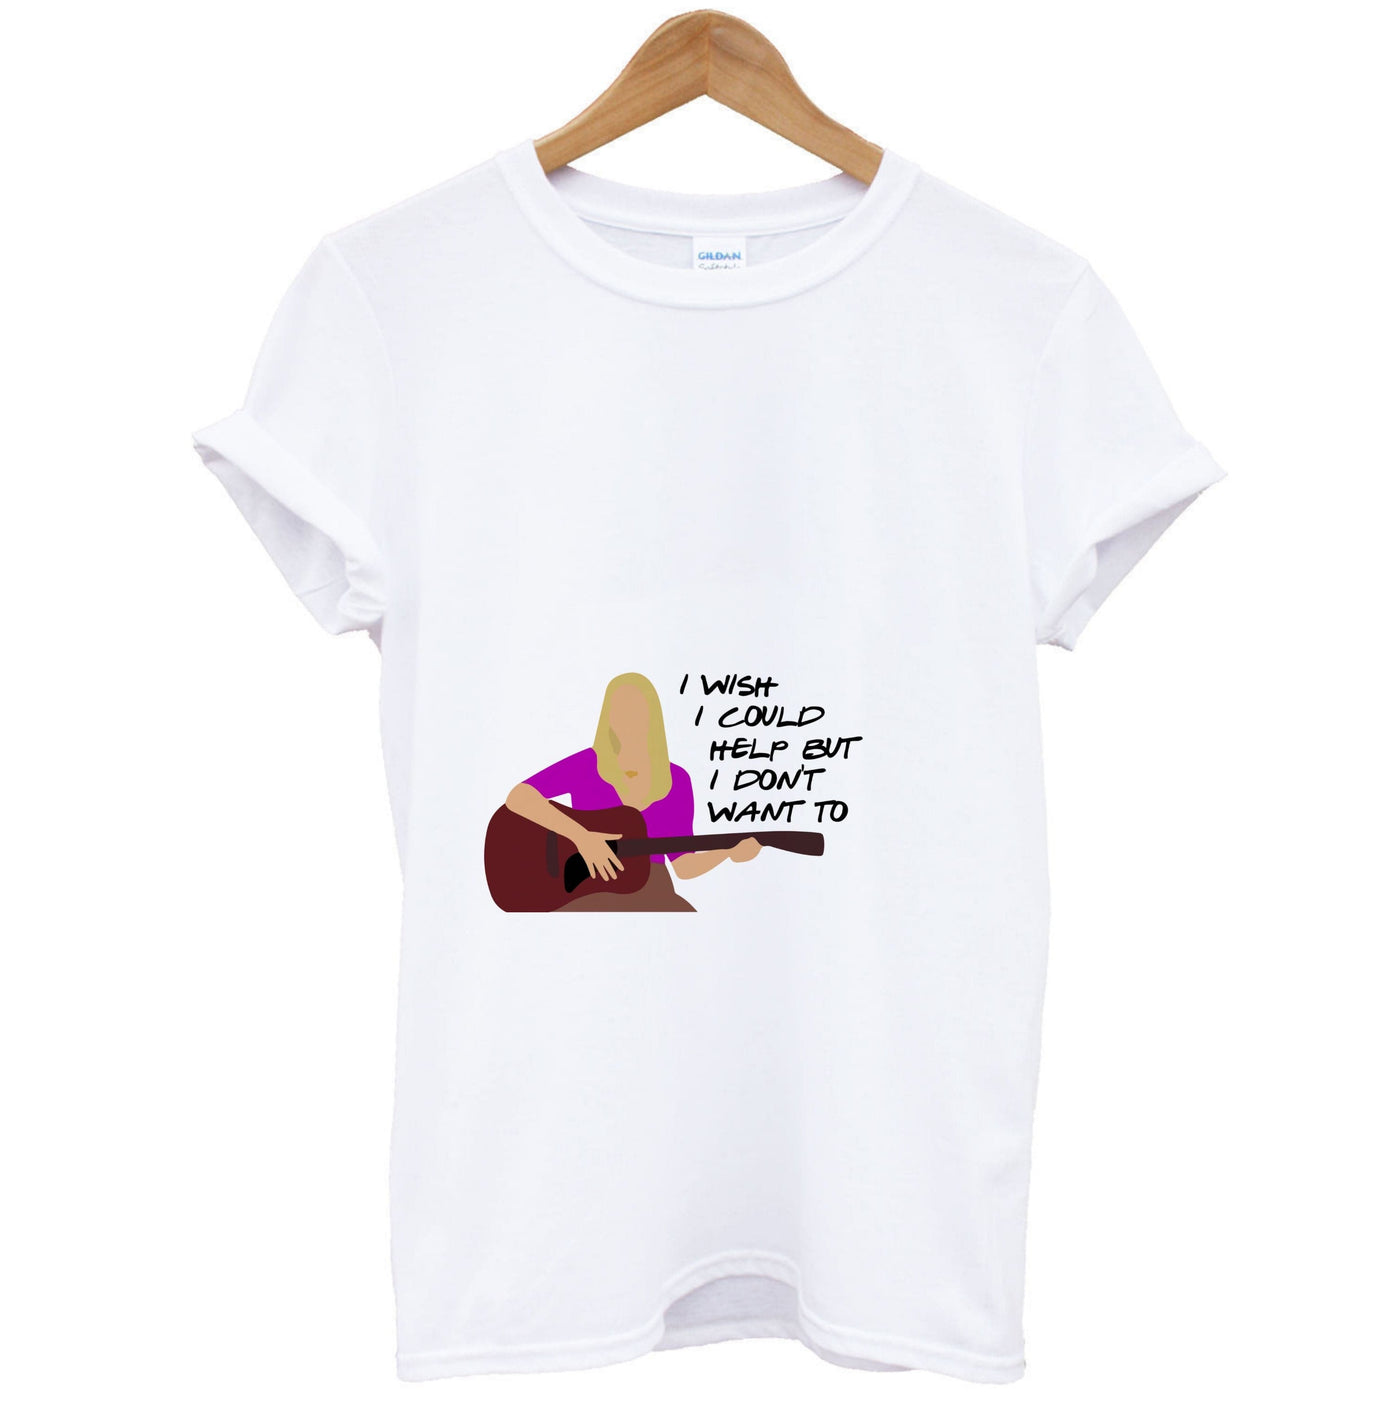 I Wish I Could Help But I Don't Want To - Friends T-Shirt